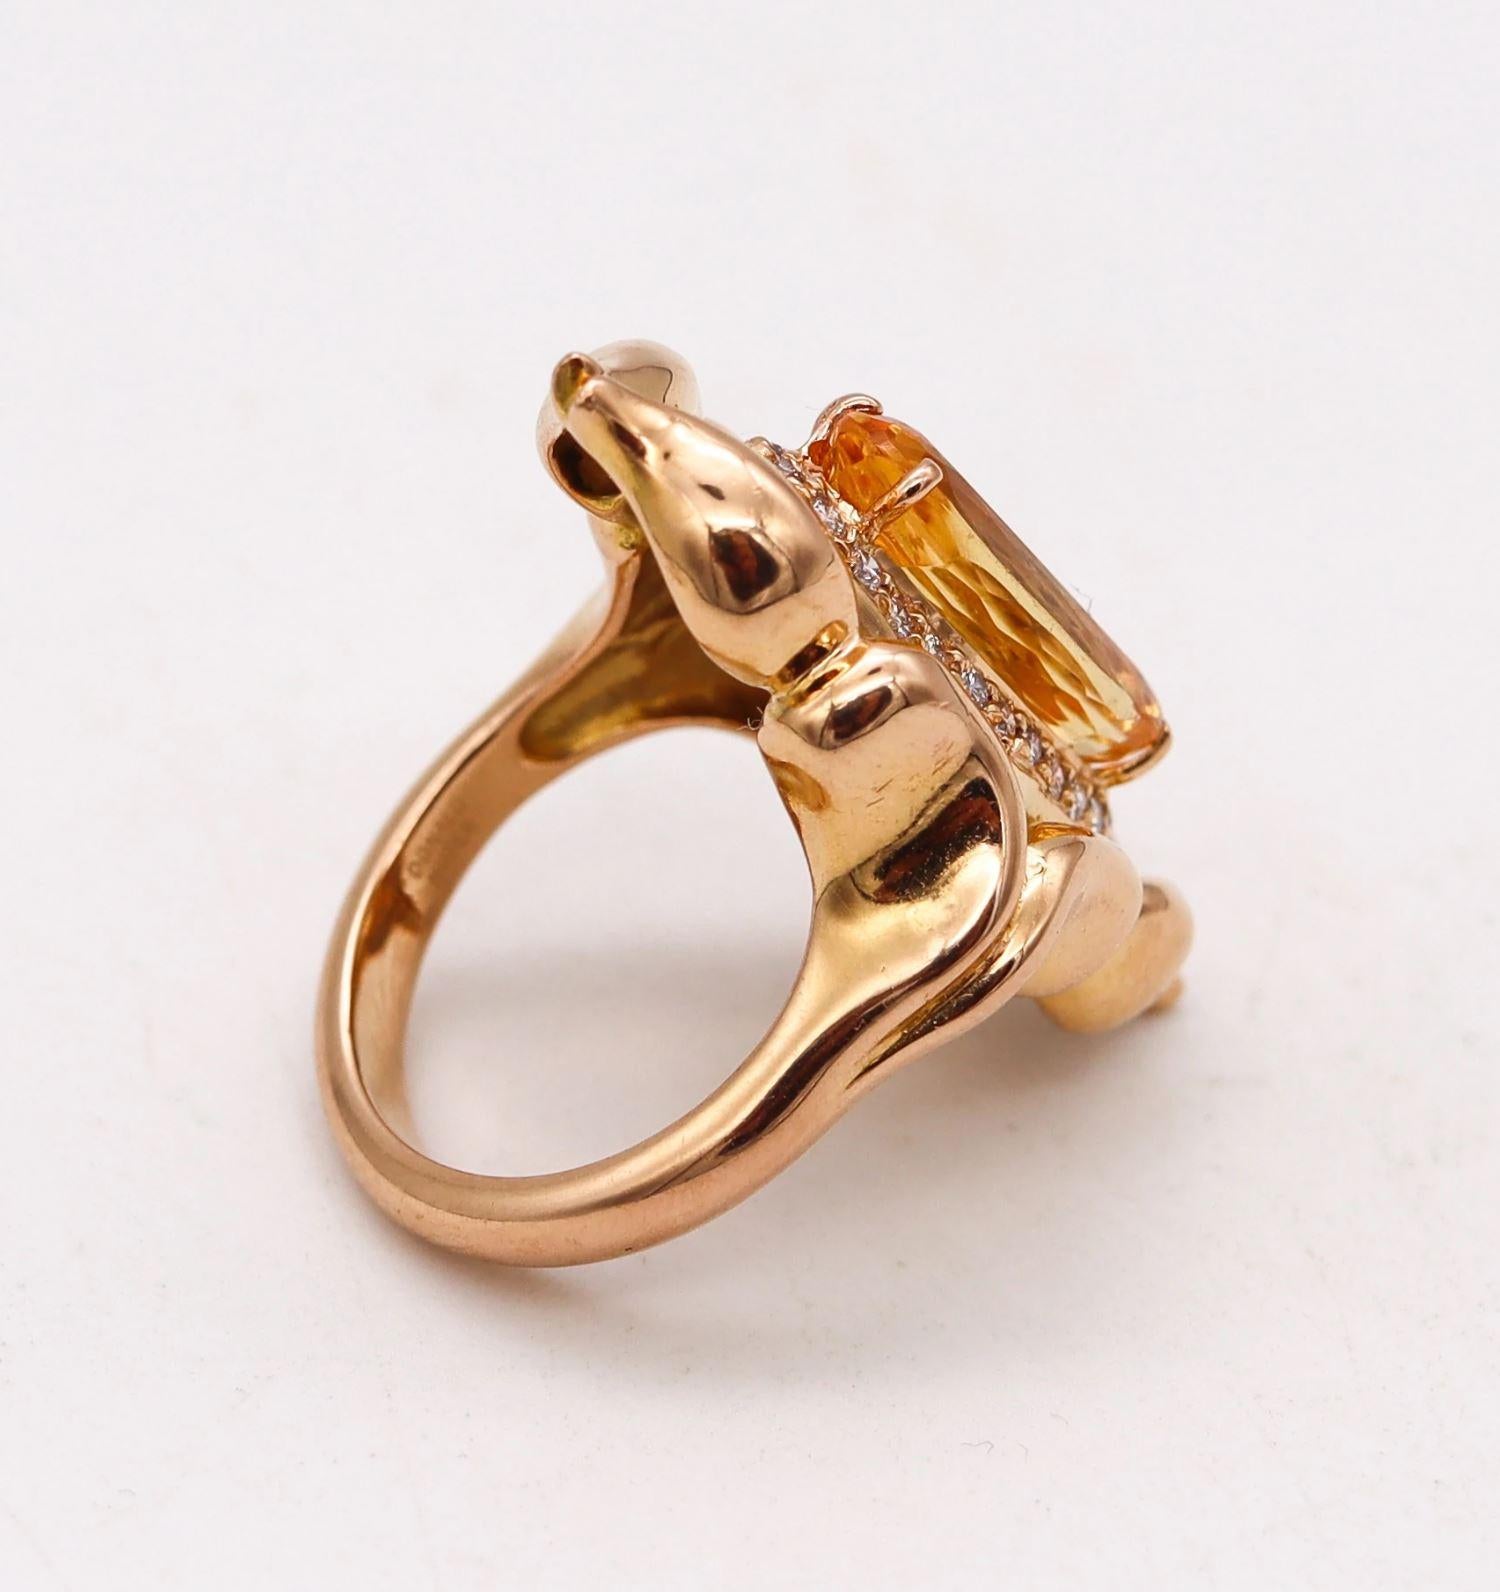 Modernist Donald Huber Cocktail Ring in 18Kt Gold with 5.38 Ctw Imperial Topaz & Diamonds